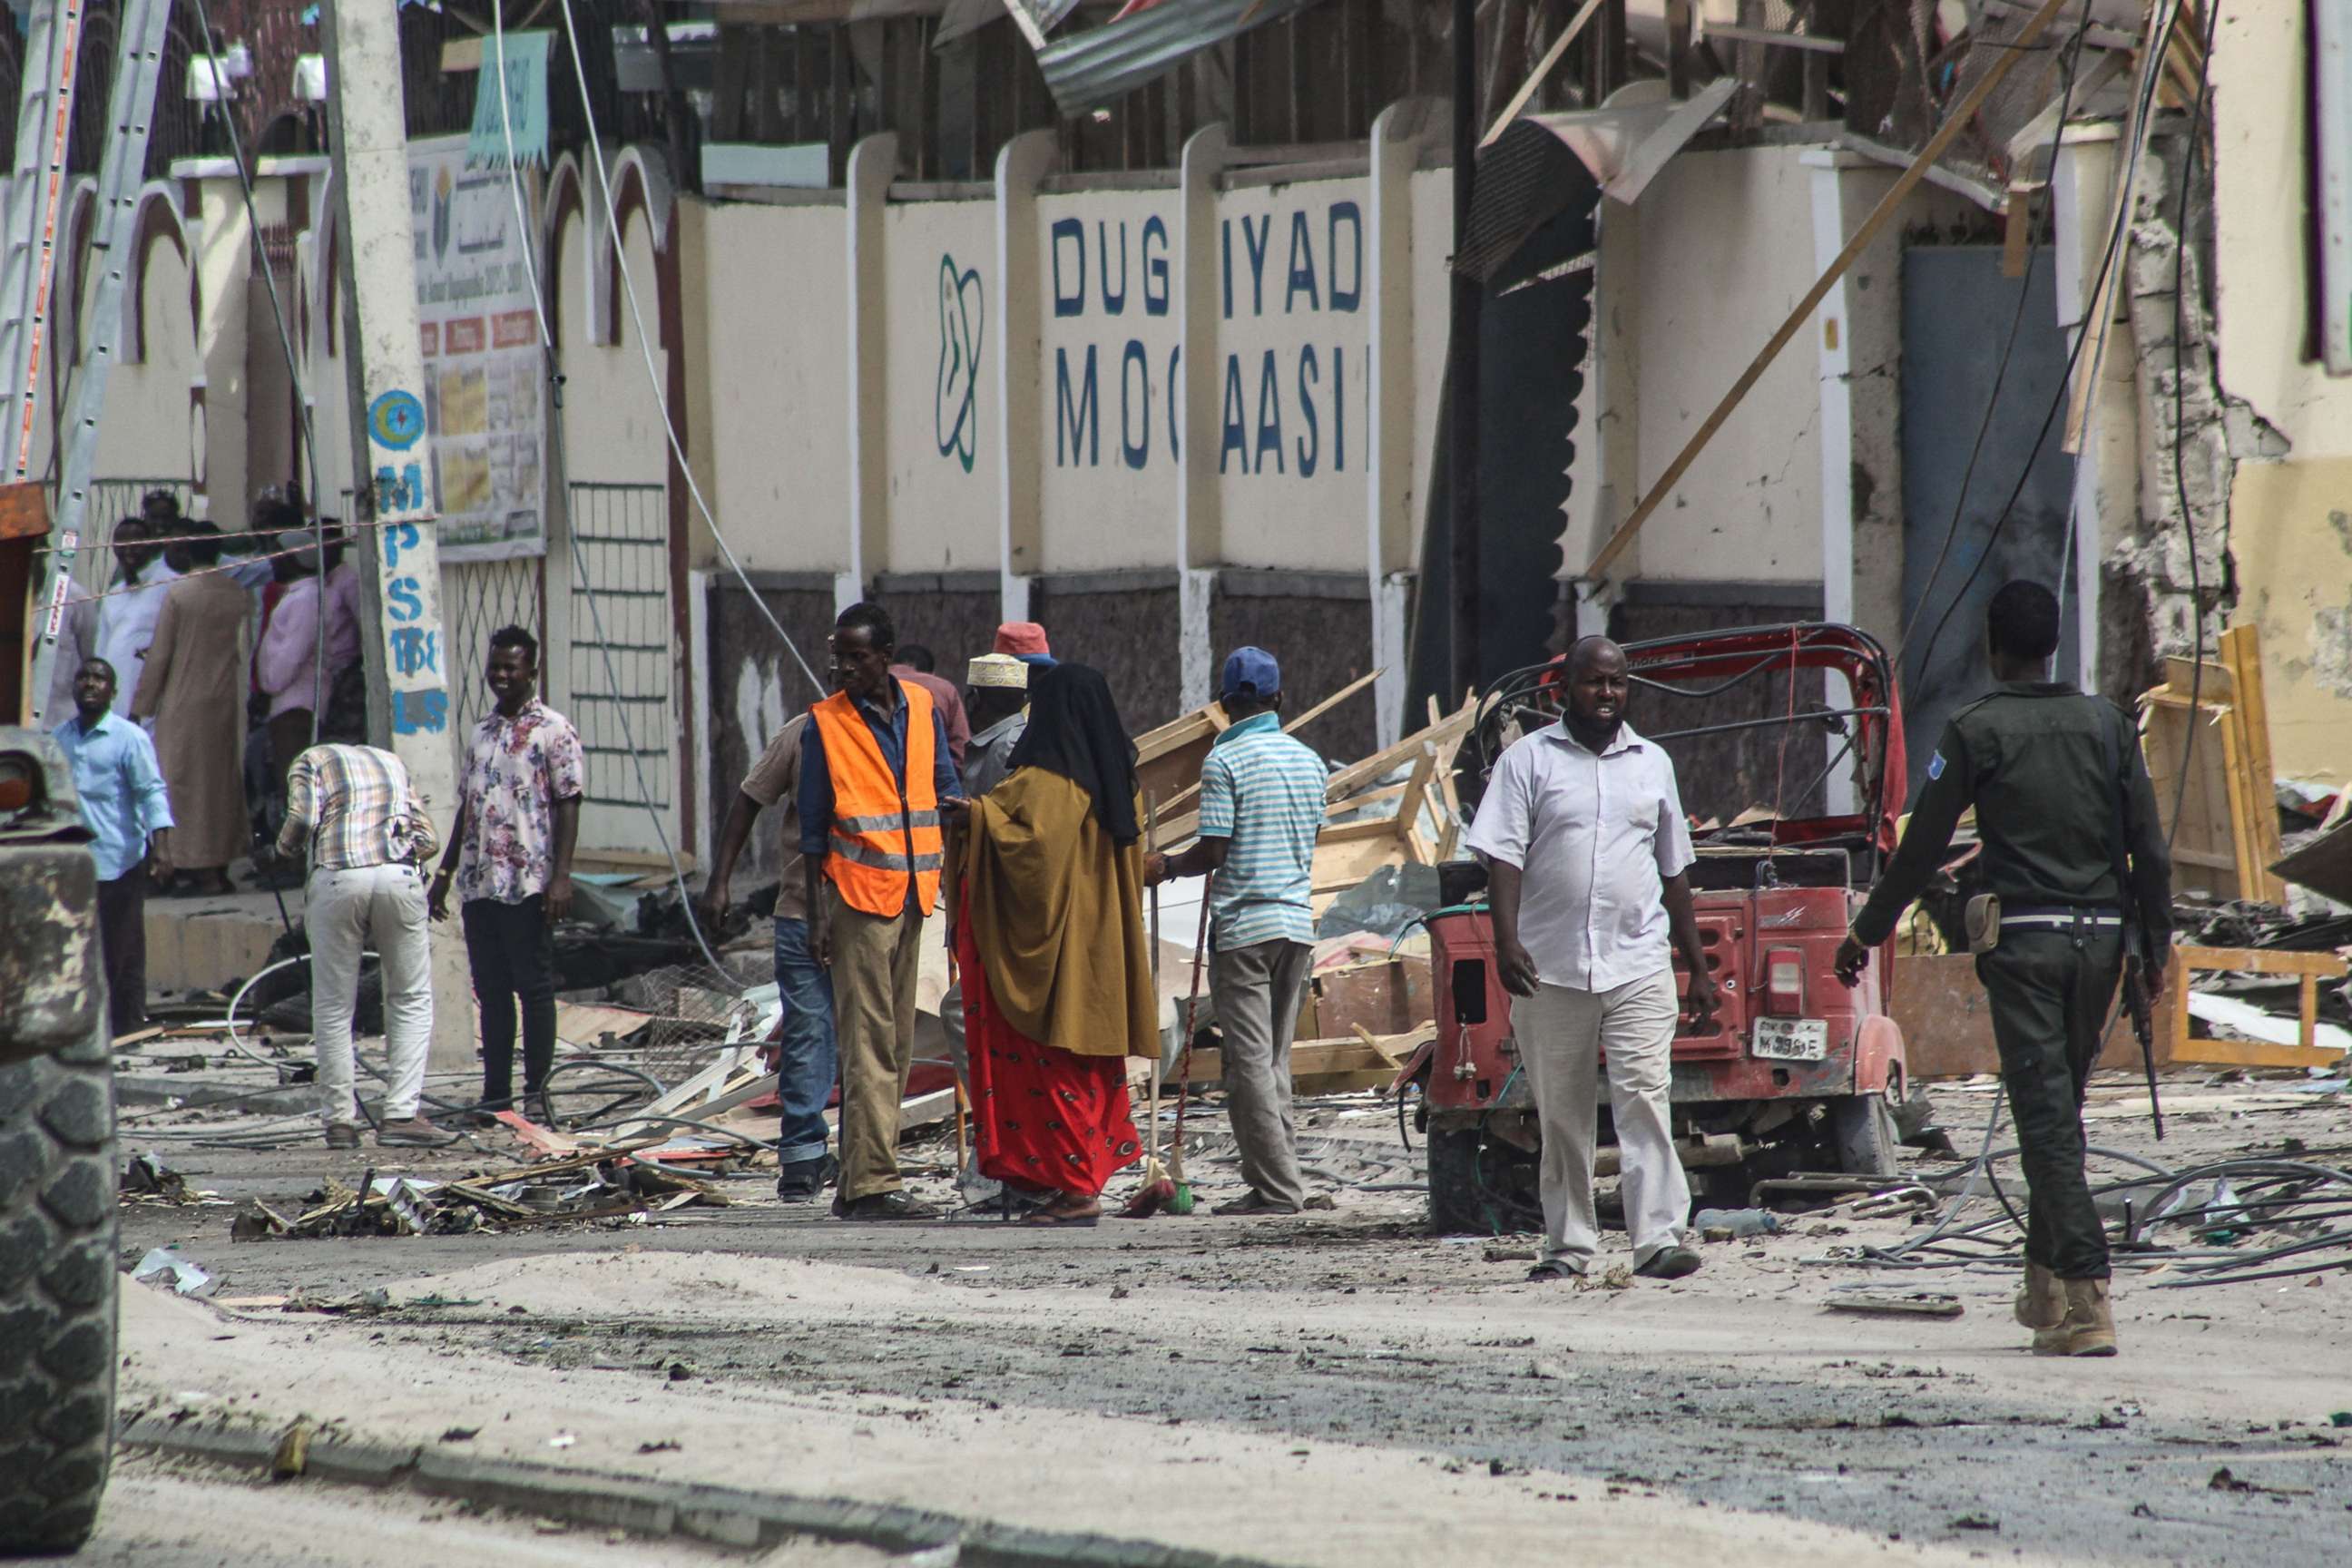 PHOTO: Police officers and people stand at the bomb explosion site in Mogadishu, Somalia, Nov. 25, 2021.